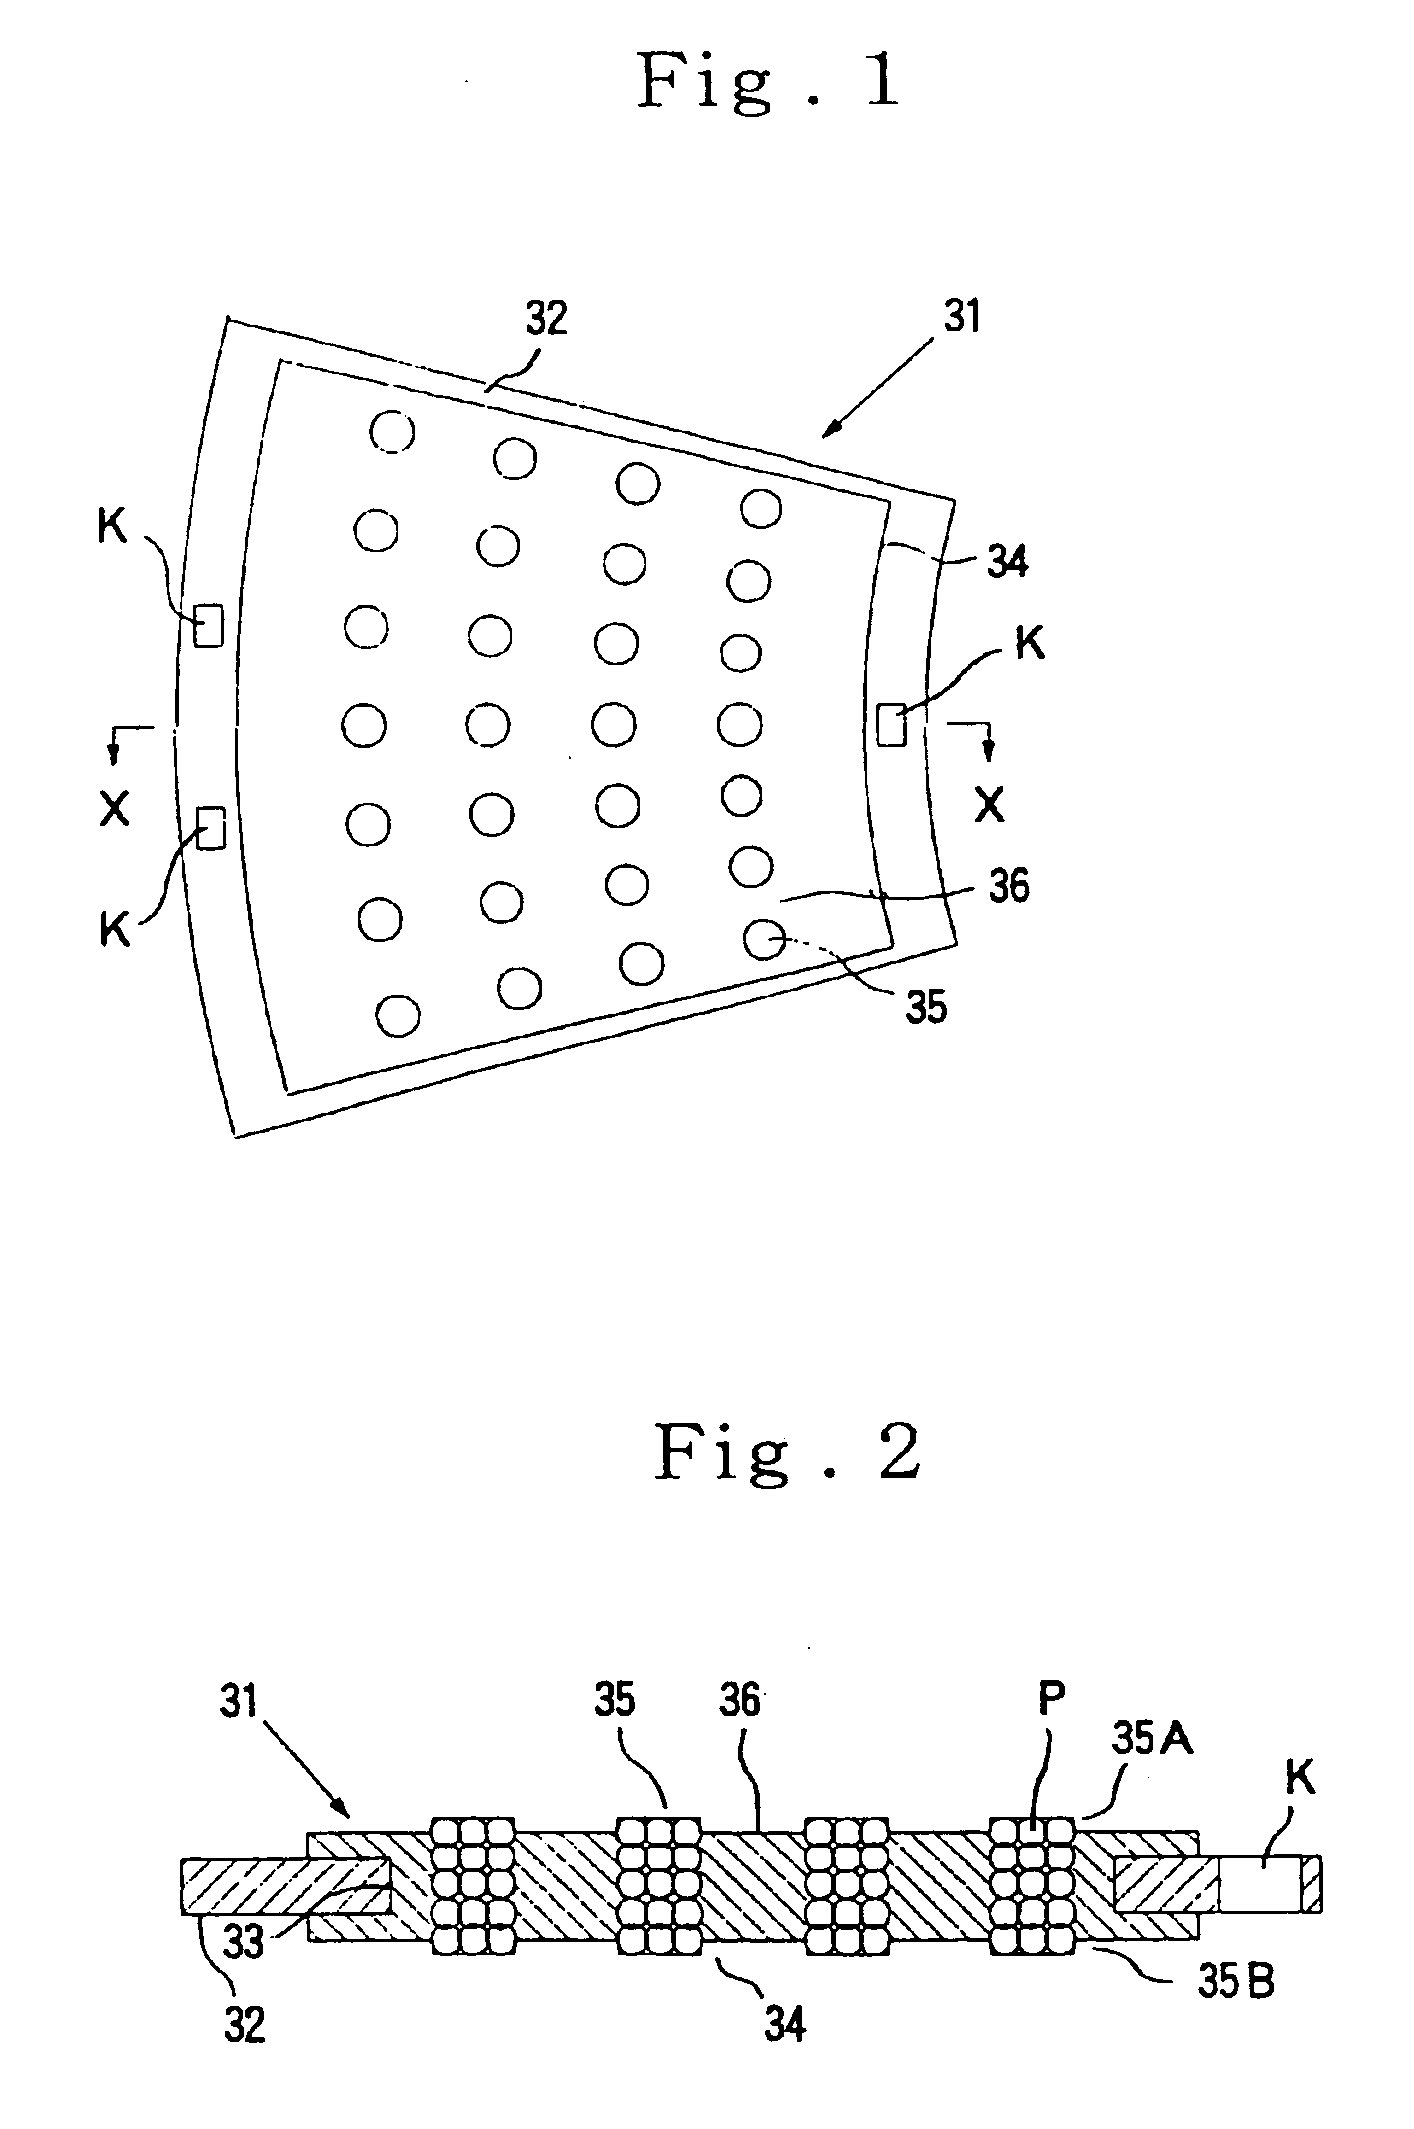 Anisotropic conductive sheet and wafer inspection device